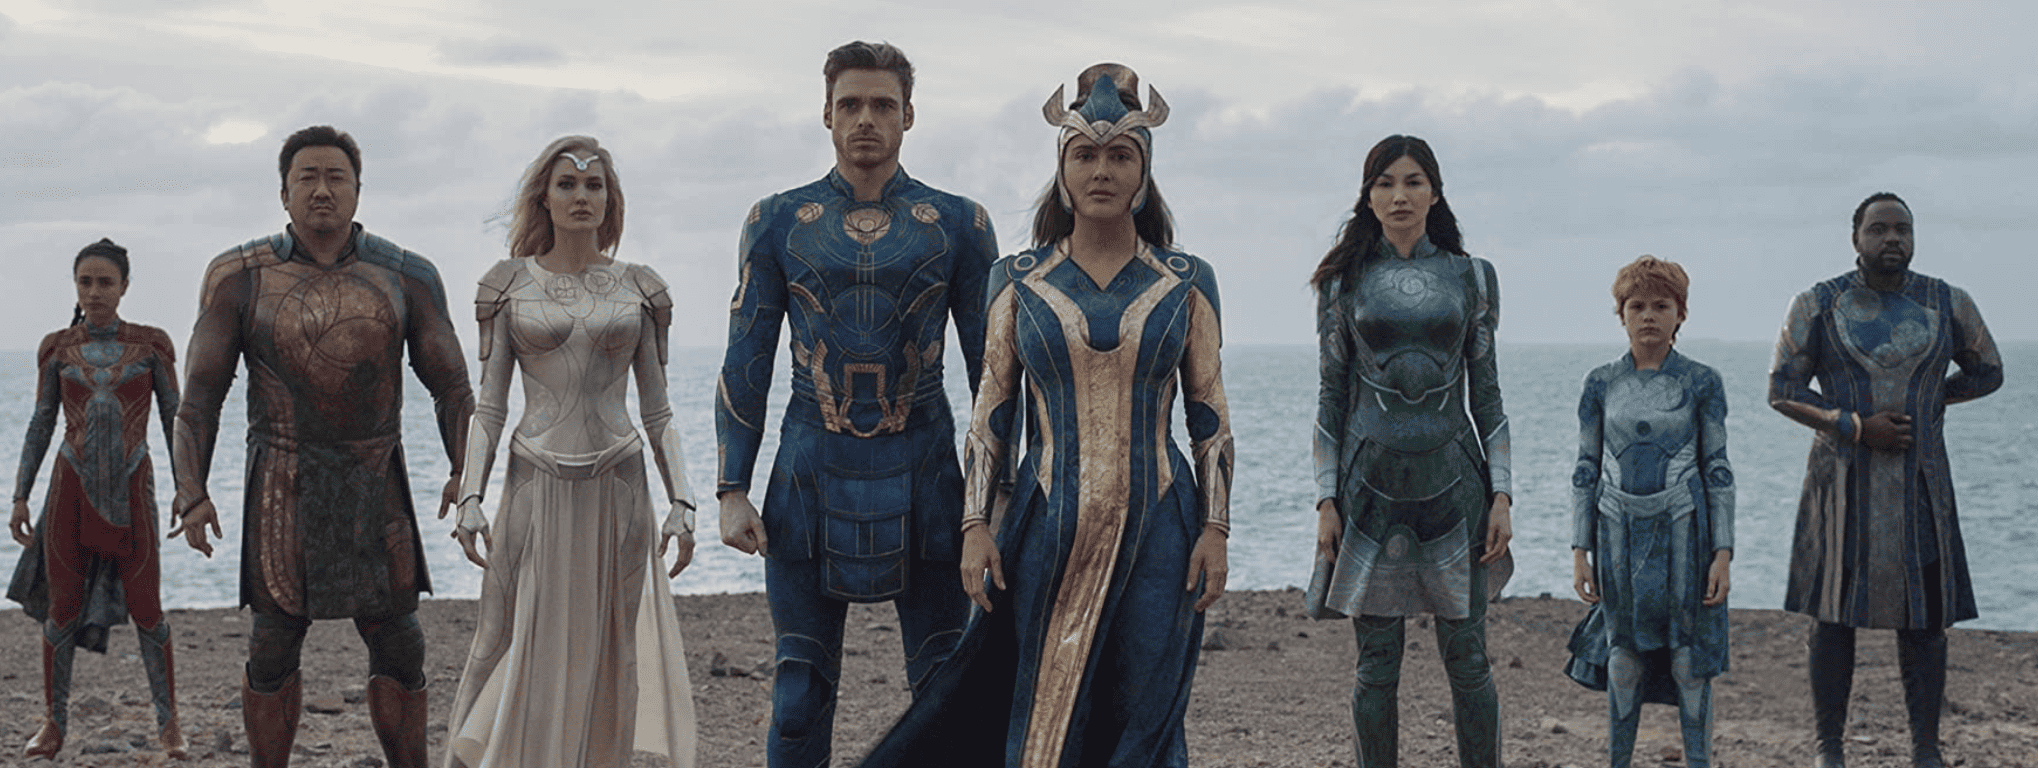 The Eternals standing on a cliff facing directly at the camera in this image from Marvel Studios